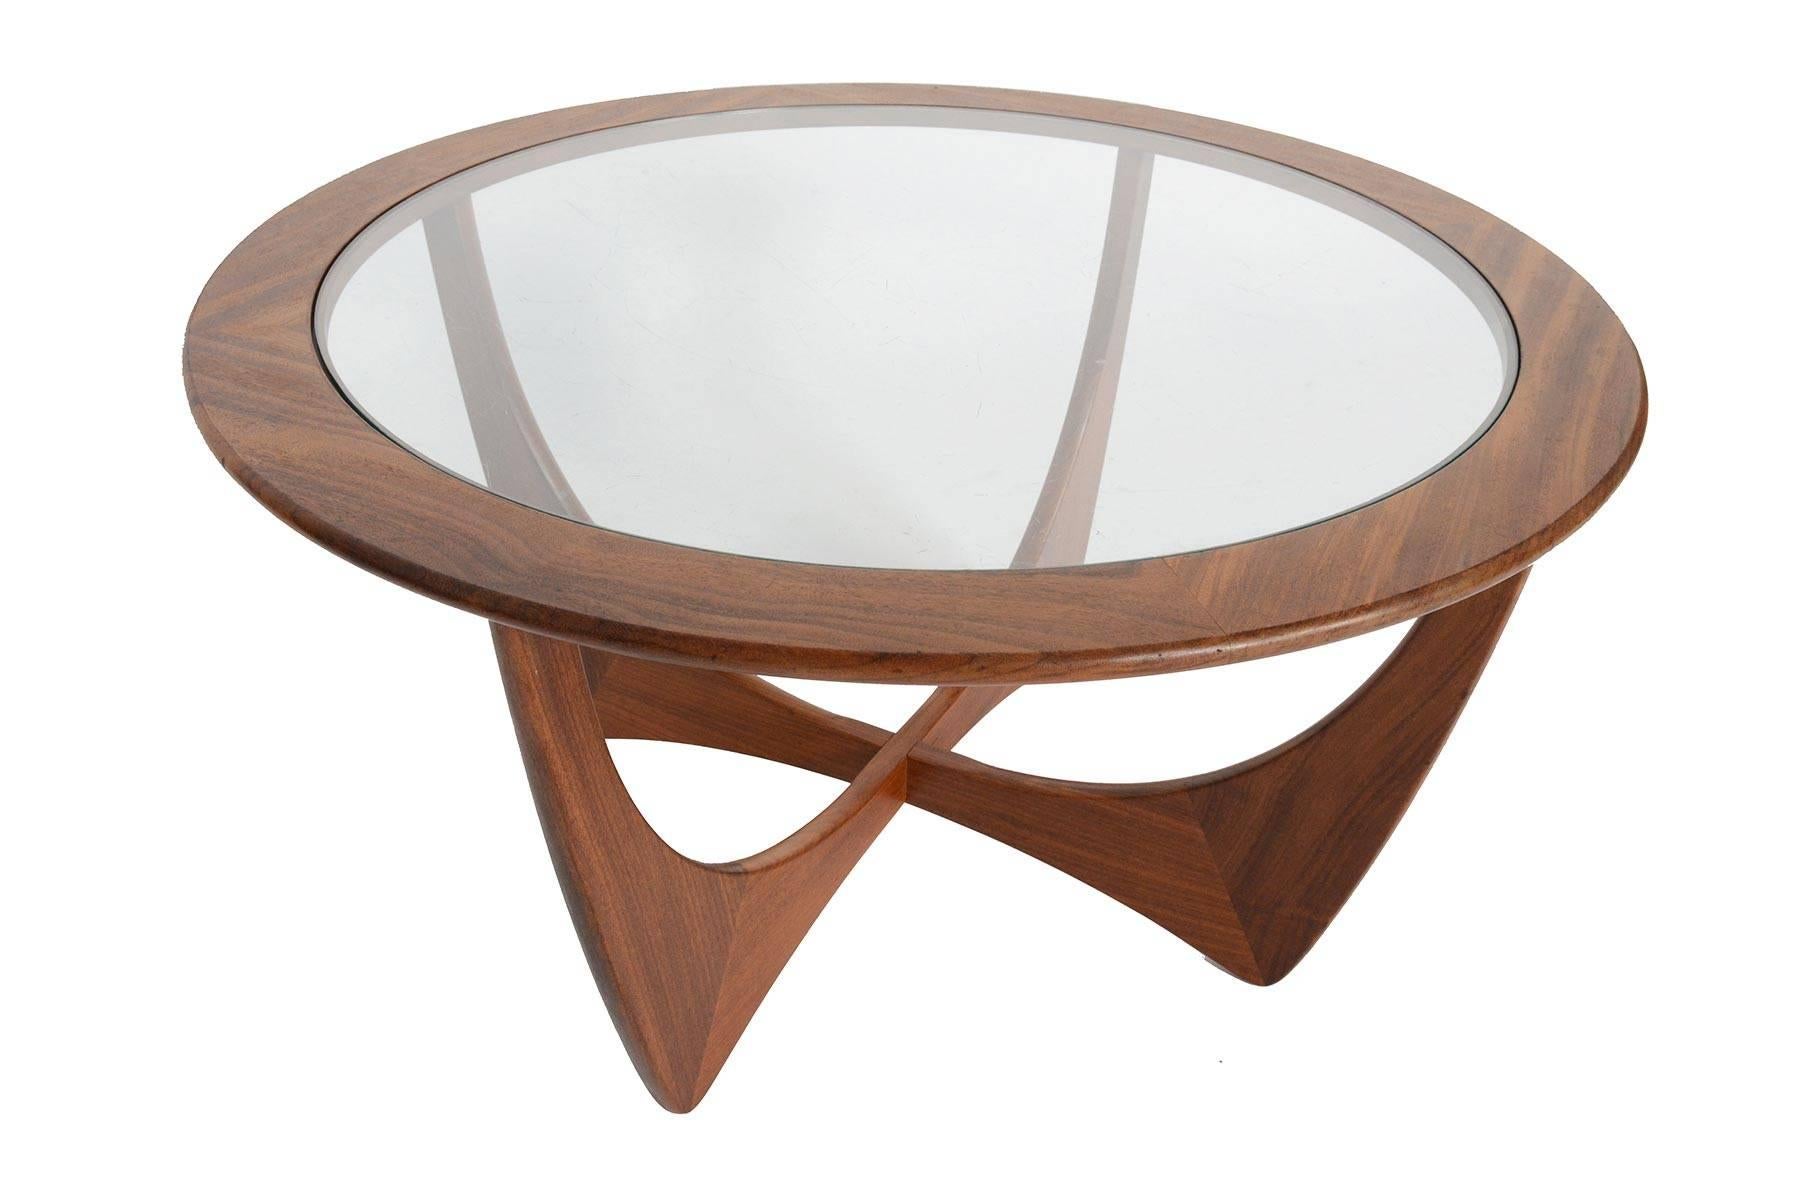 This iconic Mid-Century Modern round afromosia and glass coffee table was designed by Victor Wilkins for G Plan's Astro range in the 1960s. Gorgeous design and construction throughout. In excellent original condition with typical wear for its